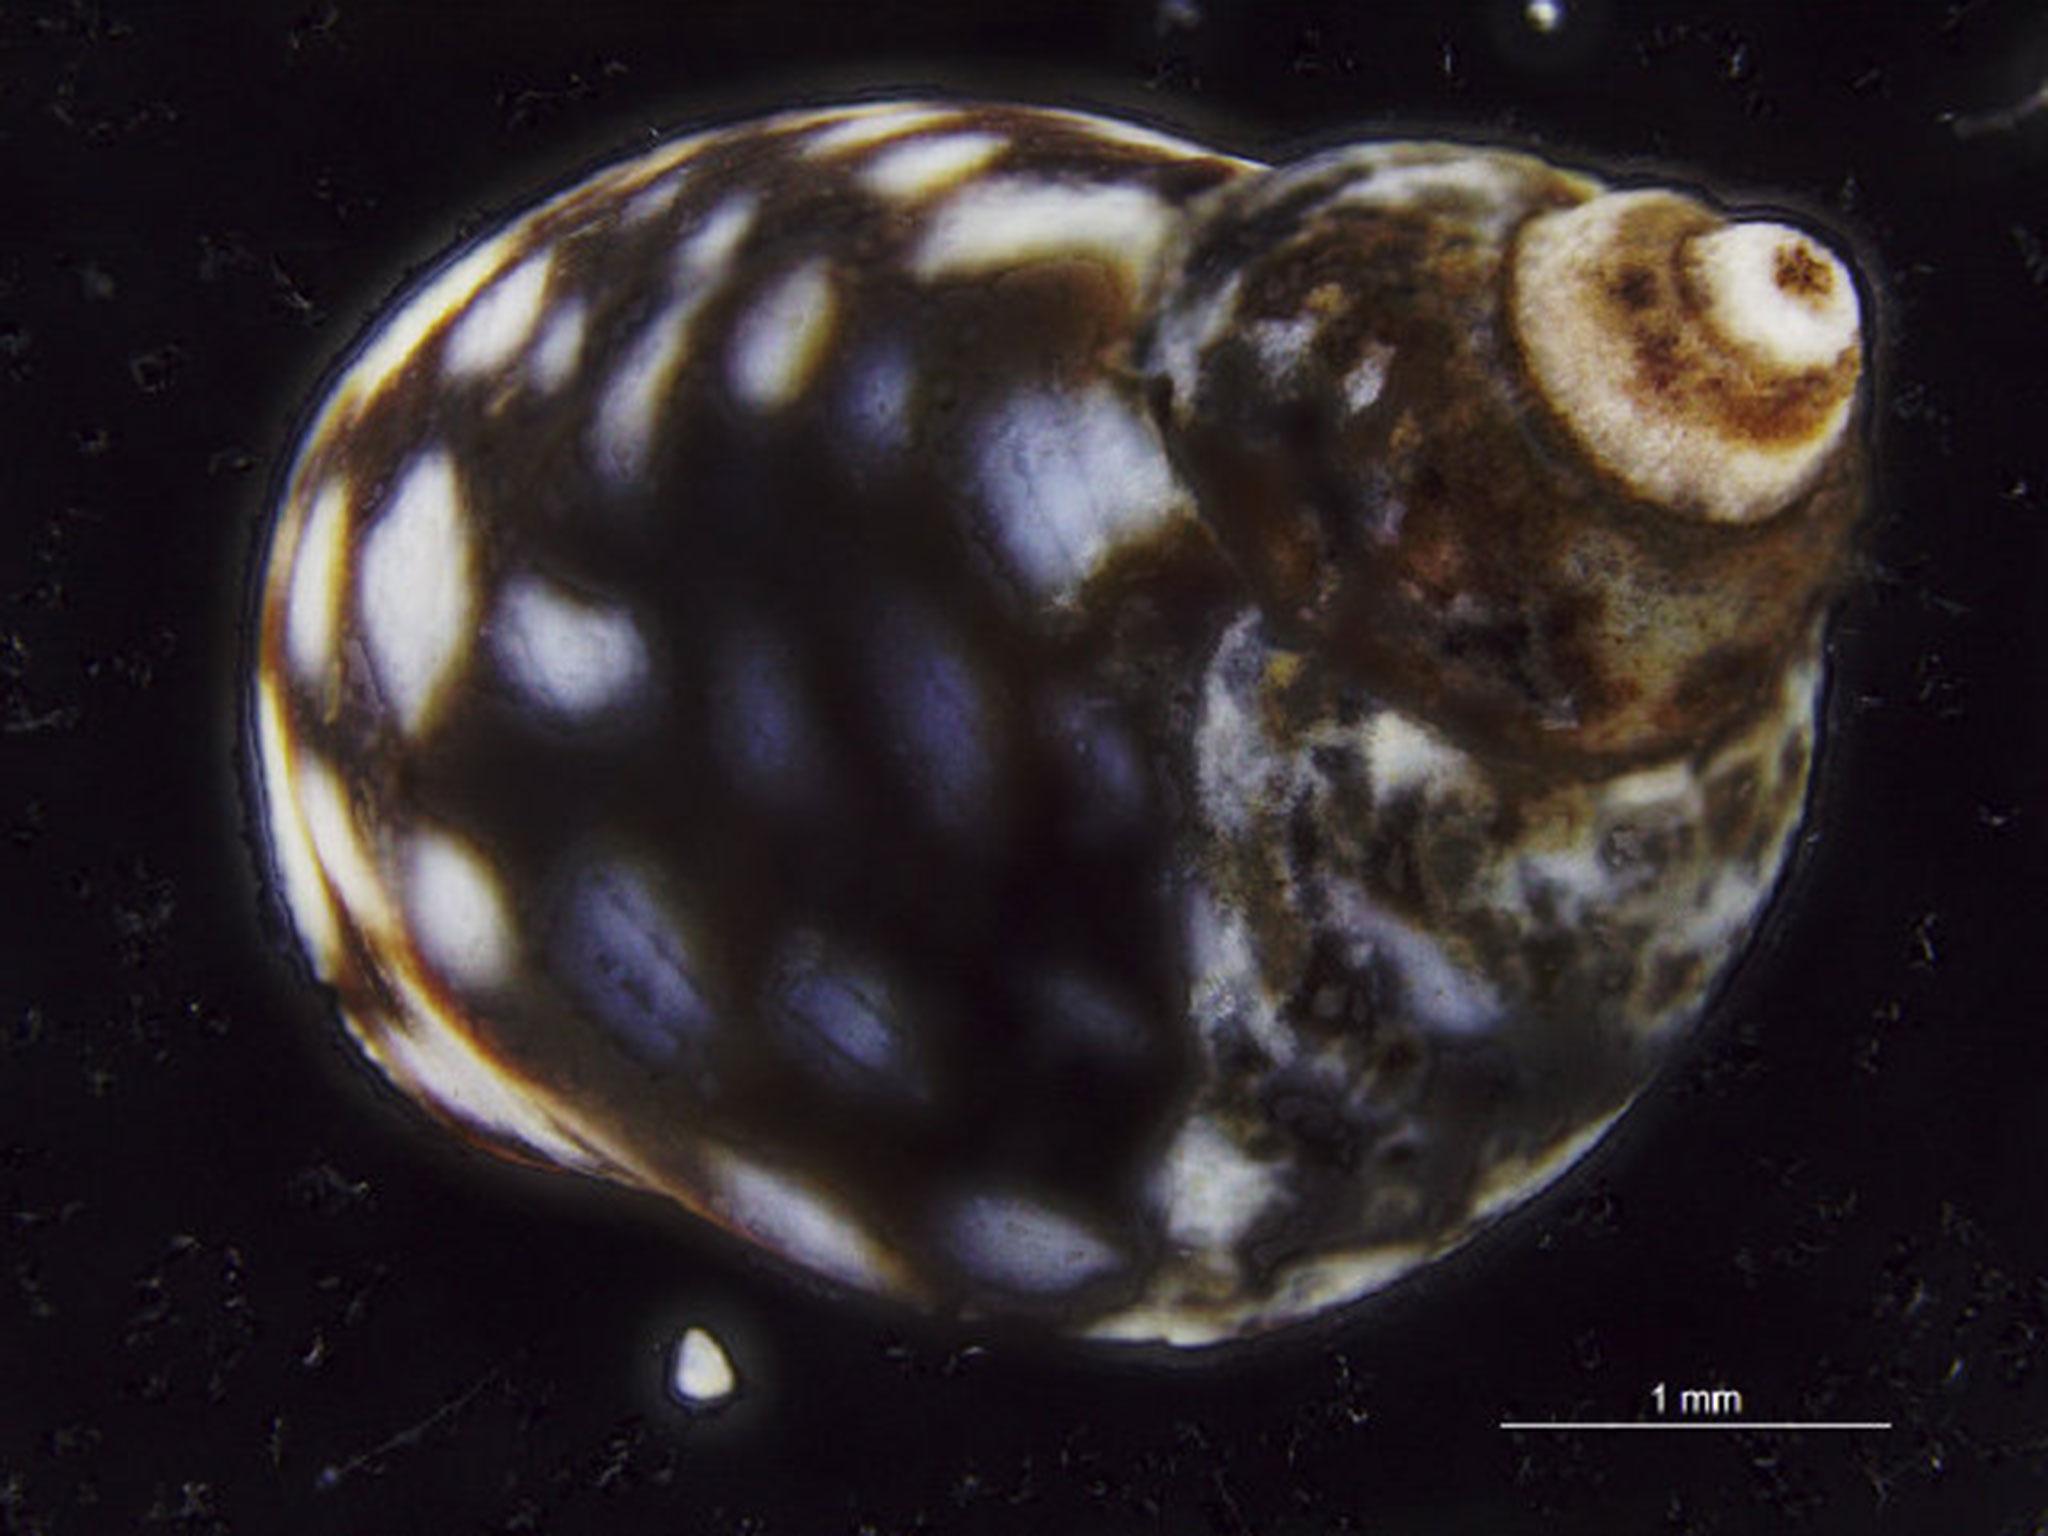 Echinolittorina punctate, a kind of tropical sea snail, was found more than 2,000km north of the tropics